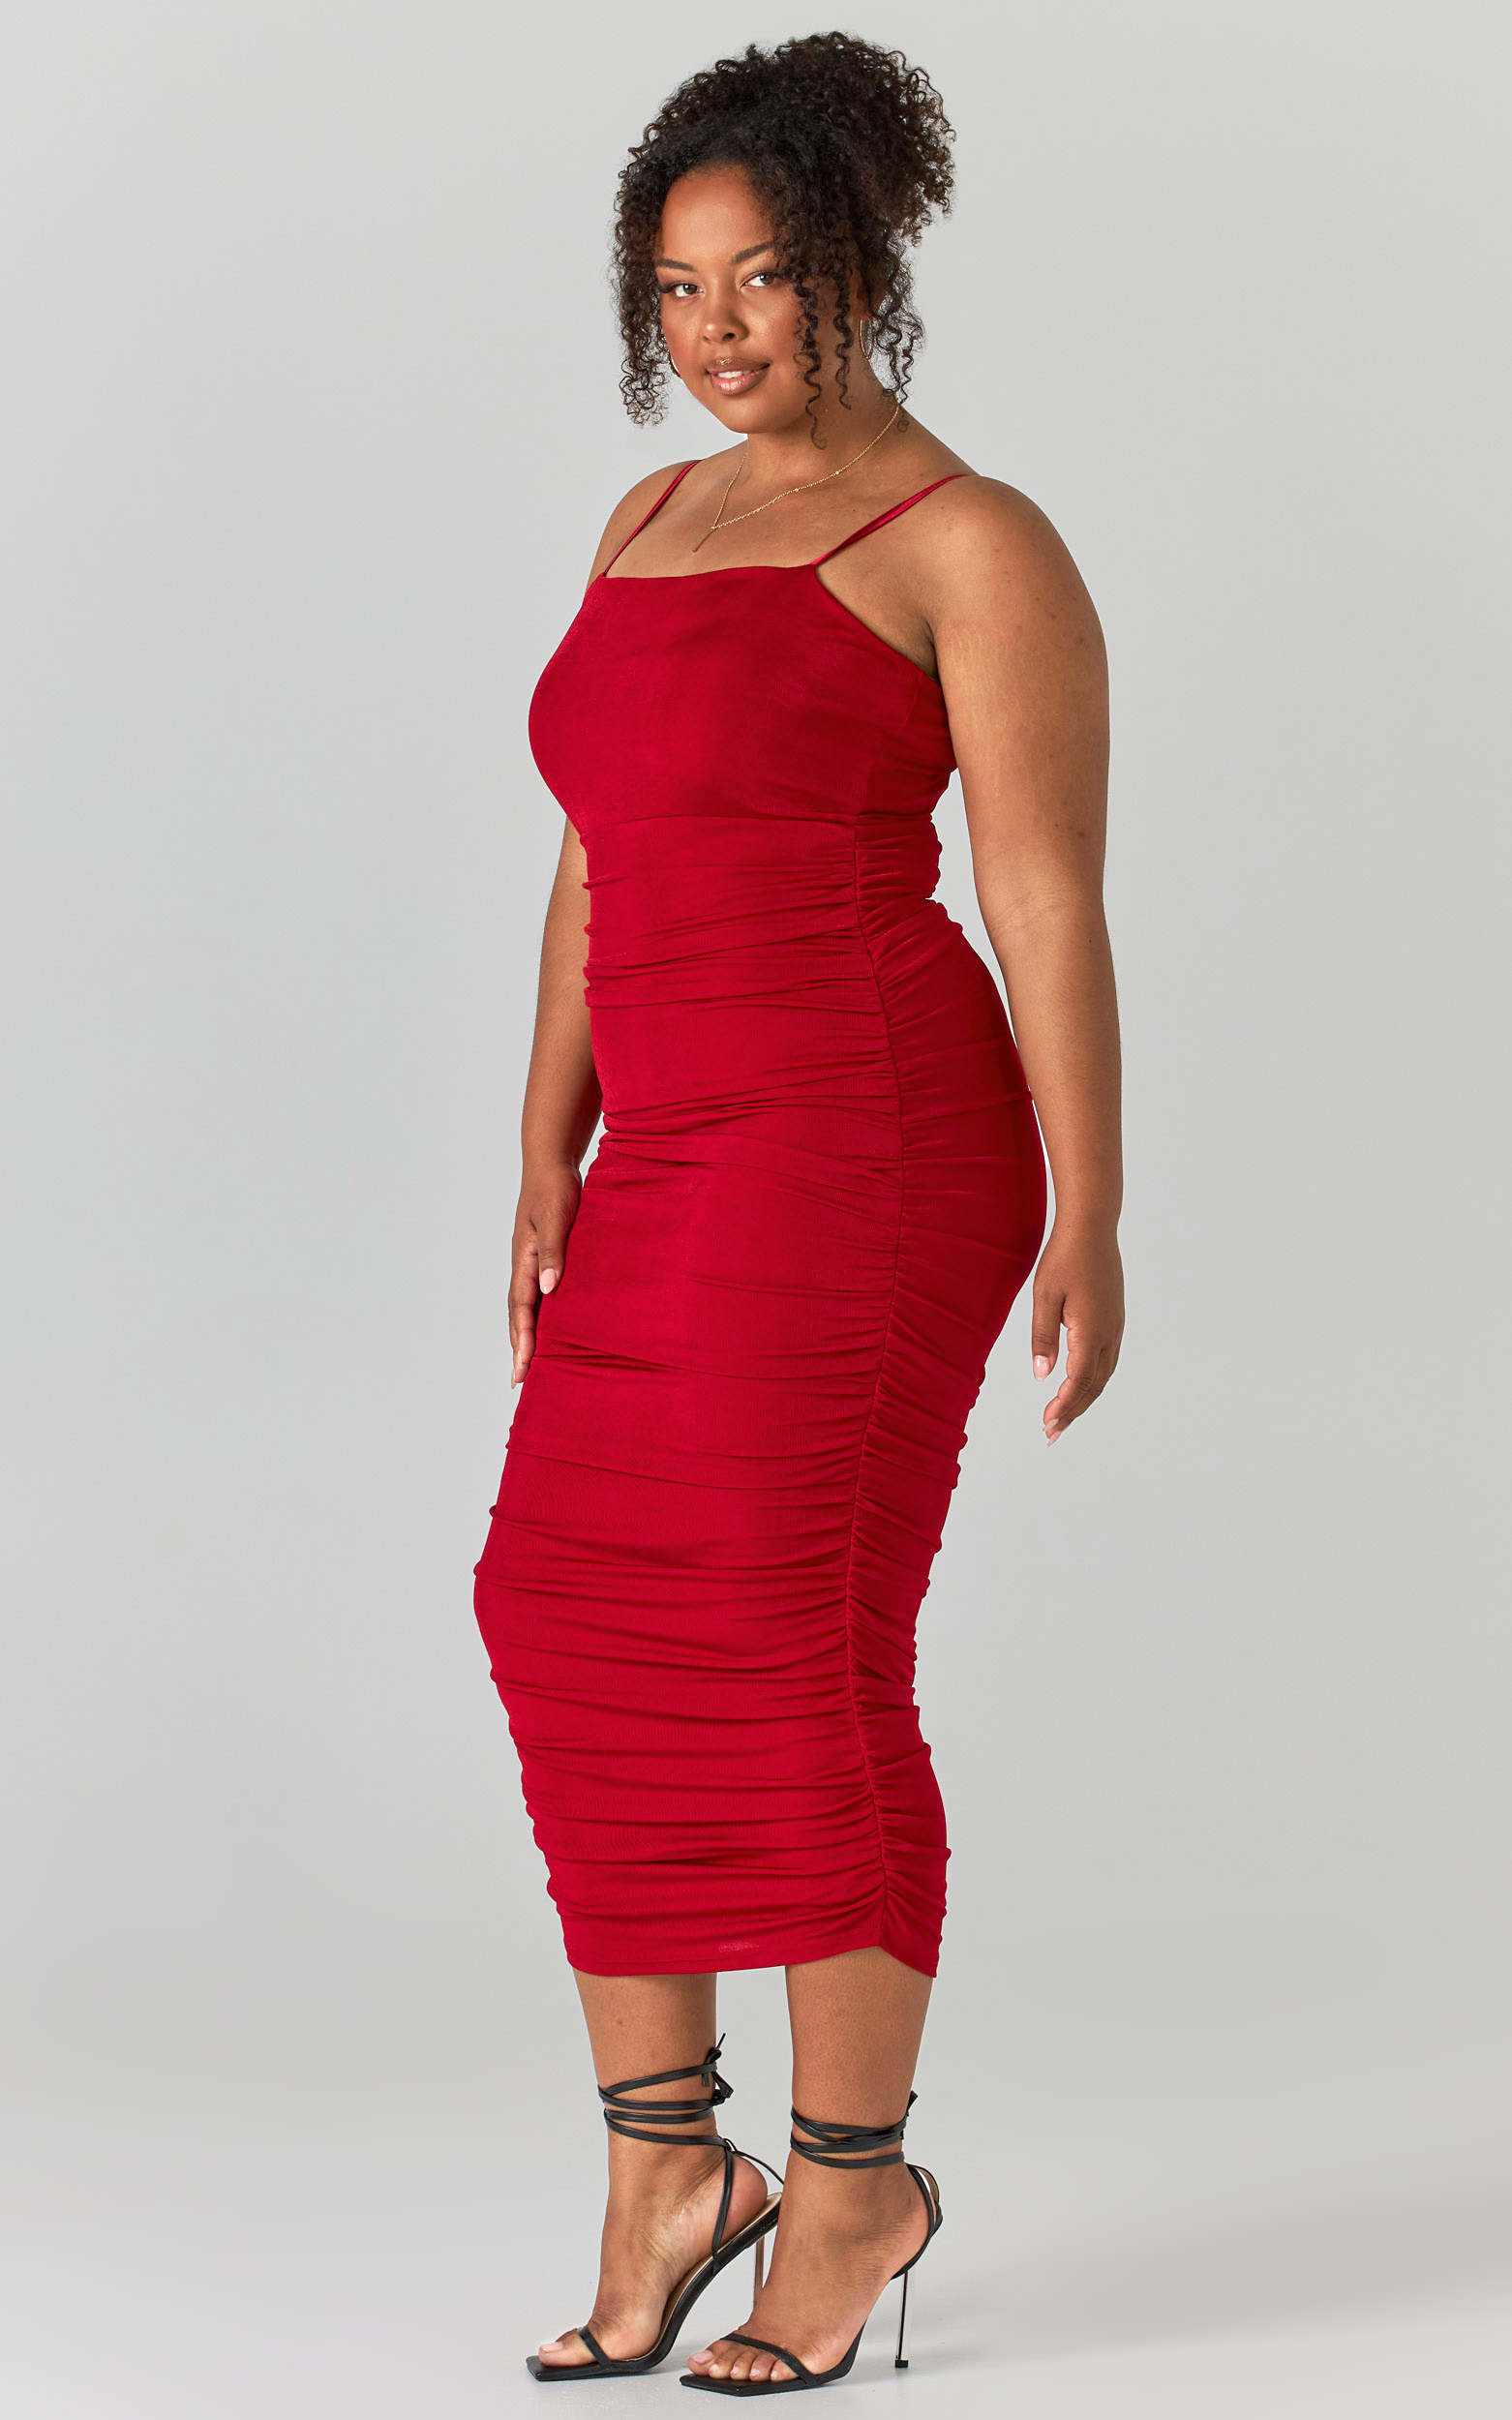 Commit To Me Bodycon Midi Dress in Red - 20, RED2, hi-res image number null